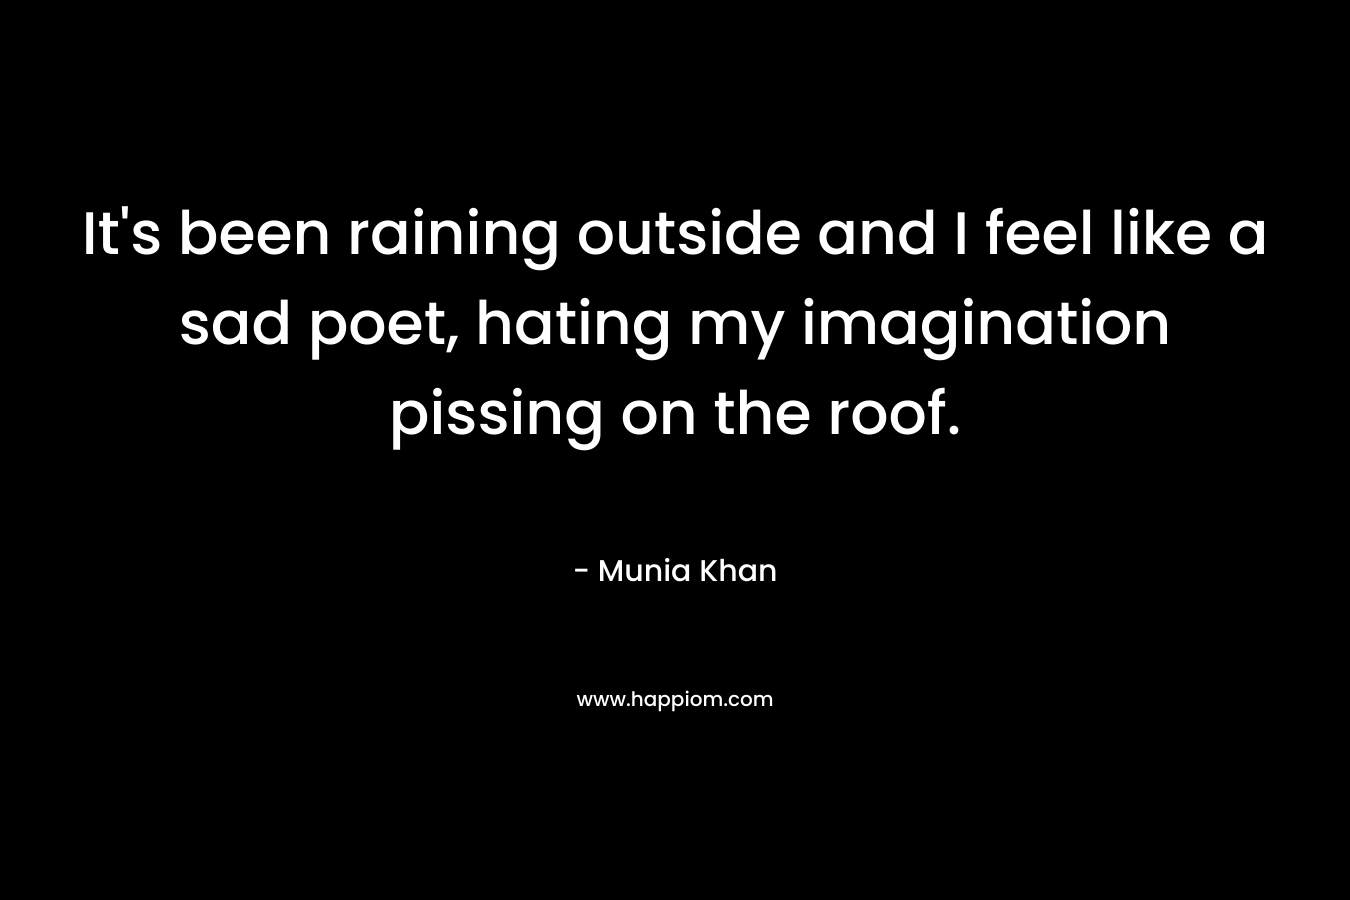 It’s been raining outside and I feel like a sad poet, hating my imagination pissing on the roof. – Munia Khan